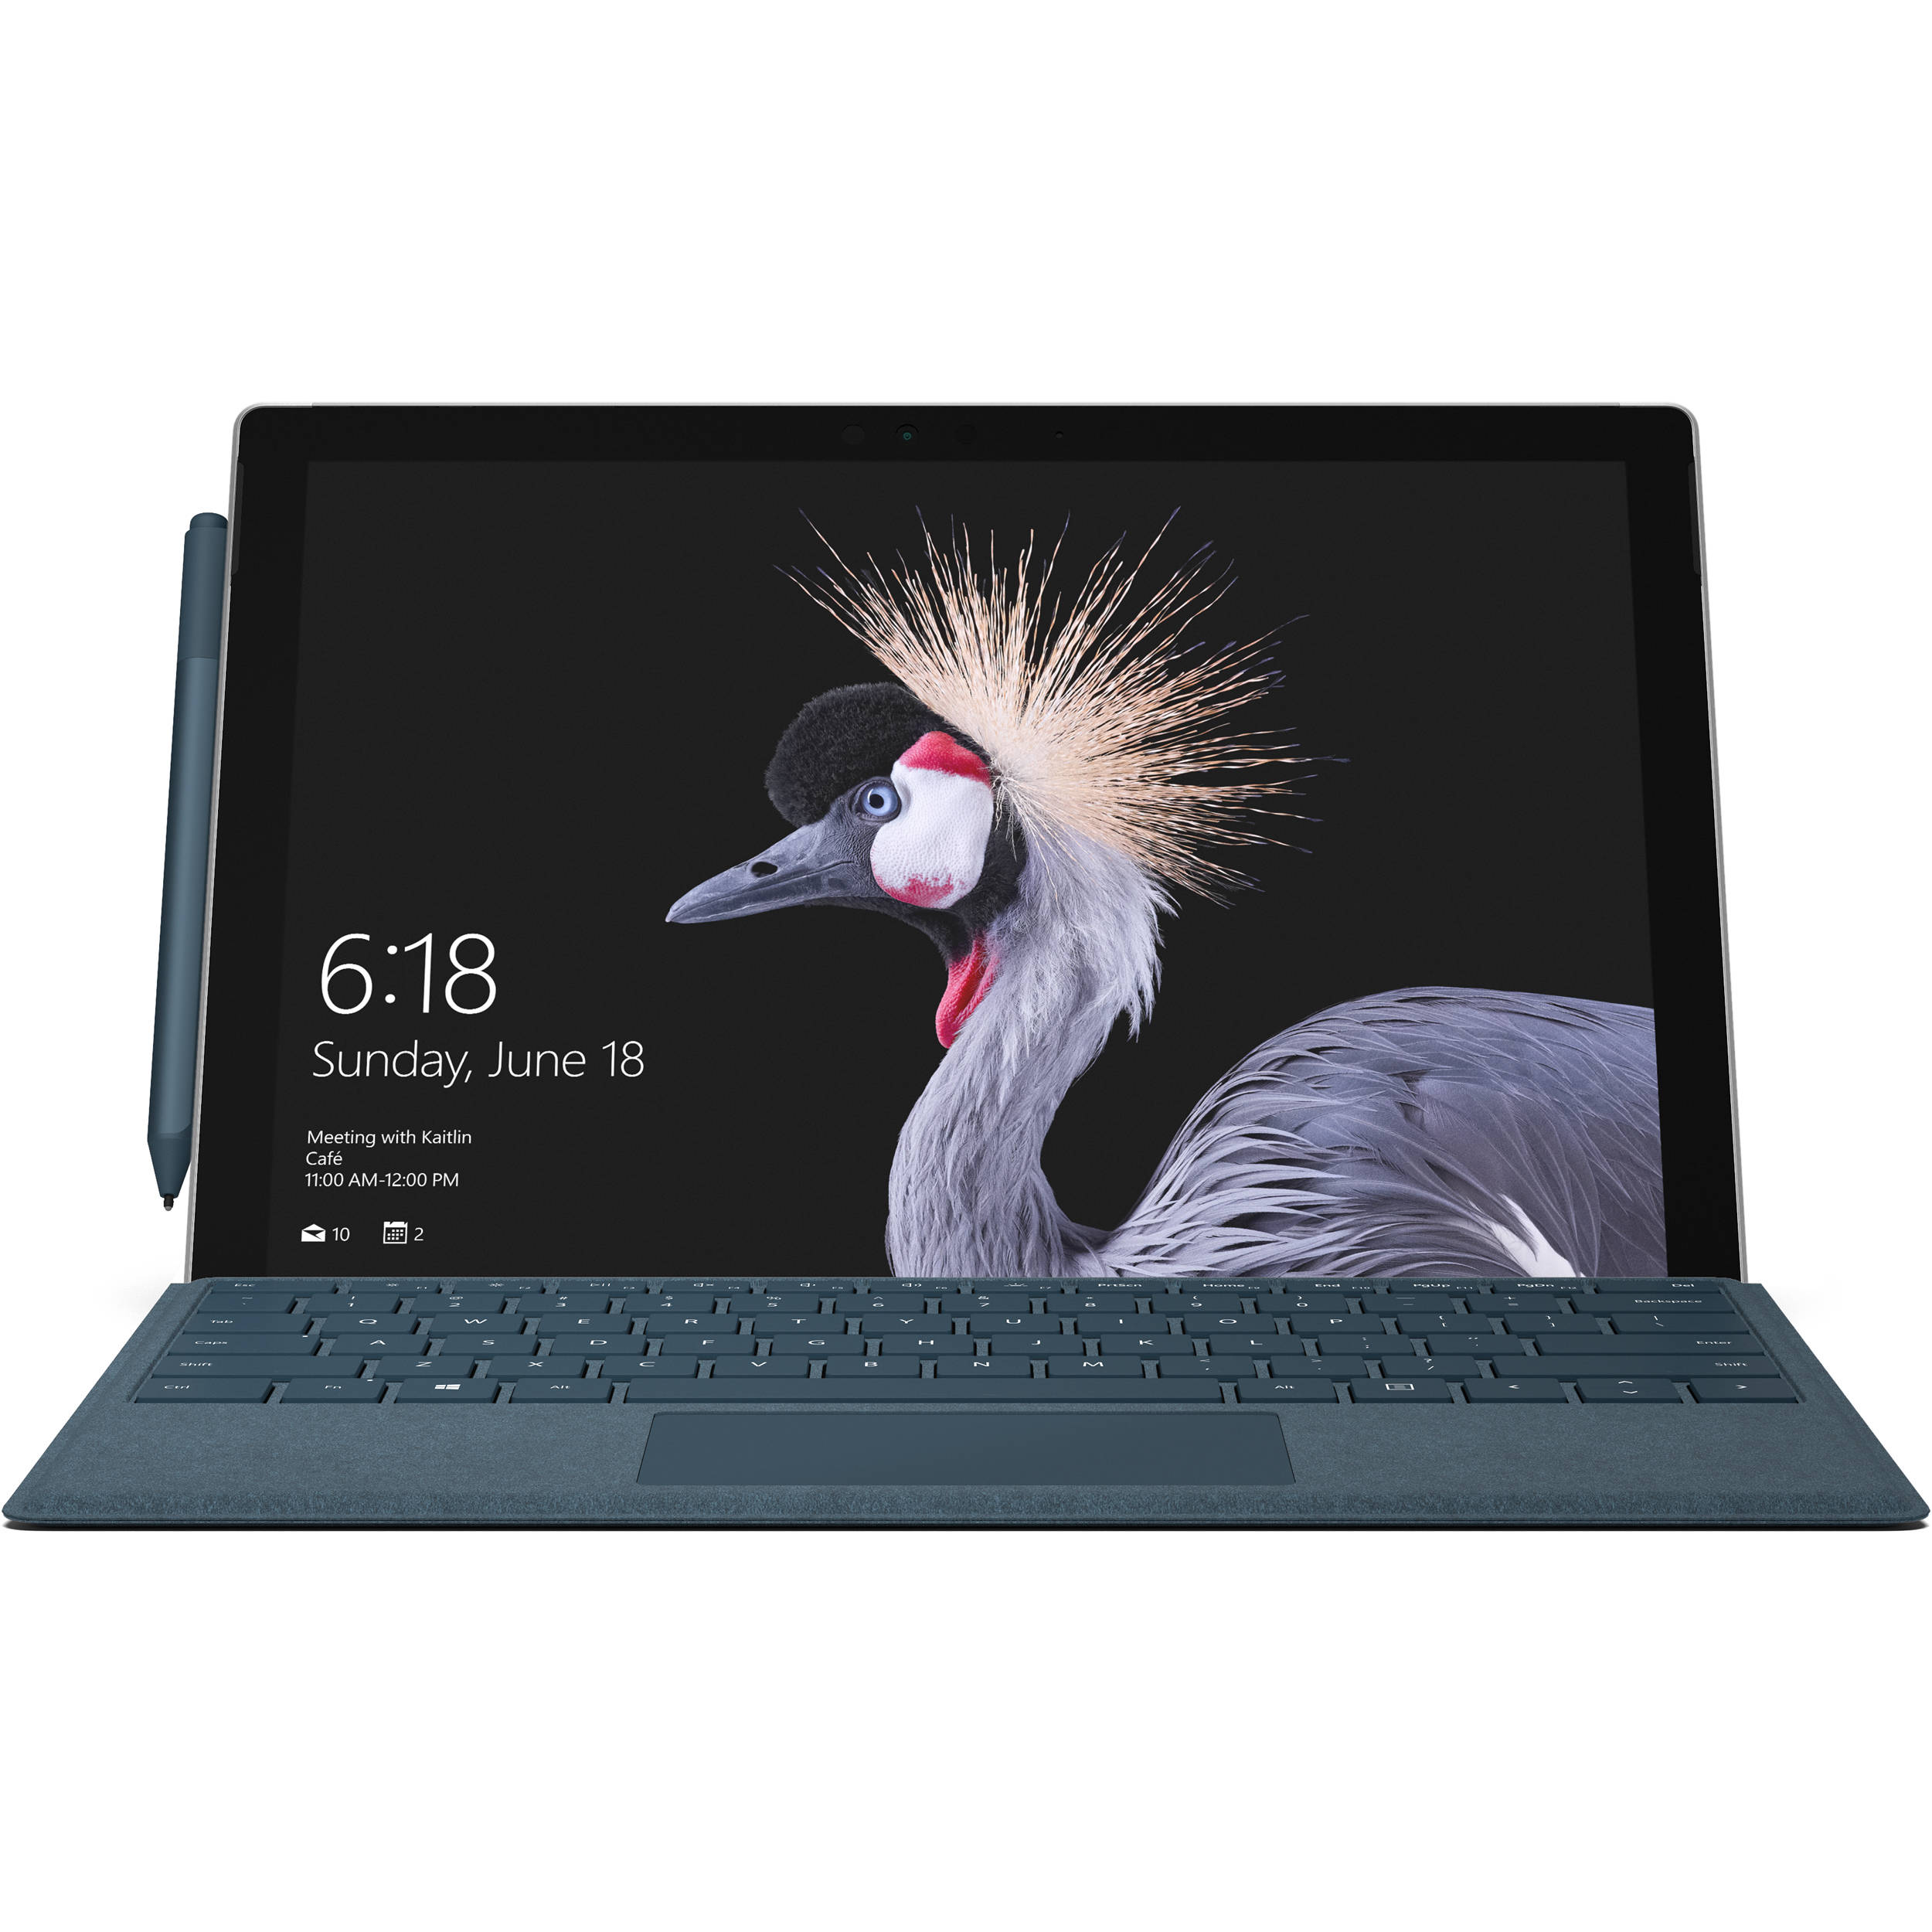 Refurbished (Good) - Microsoft Surface Pro (2017 Wifi Only) - 12.3